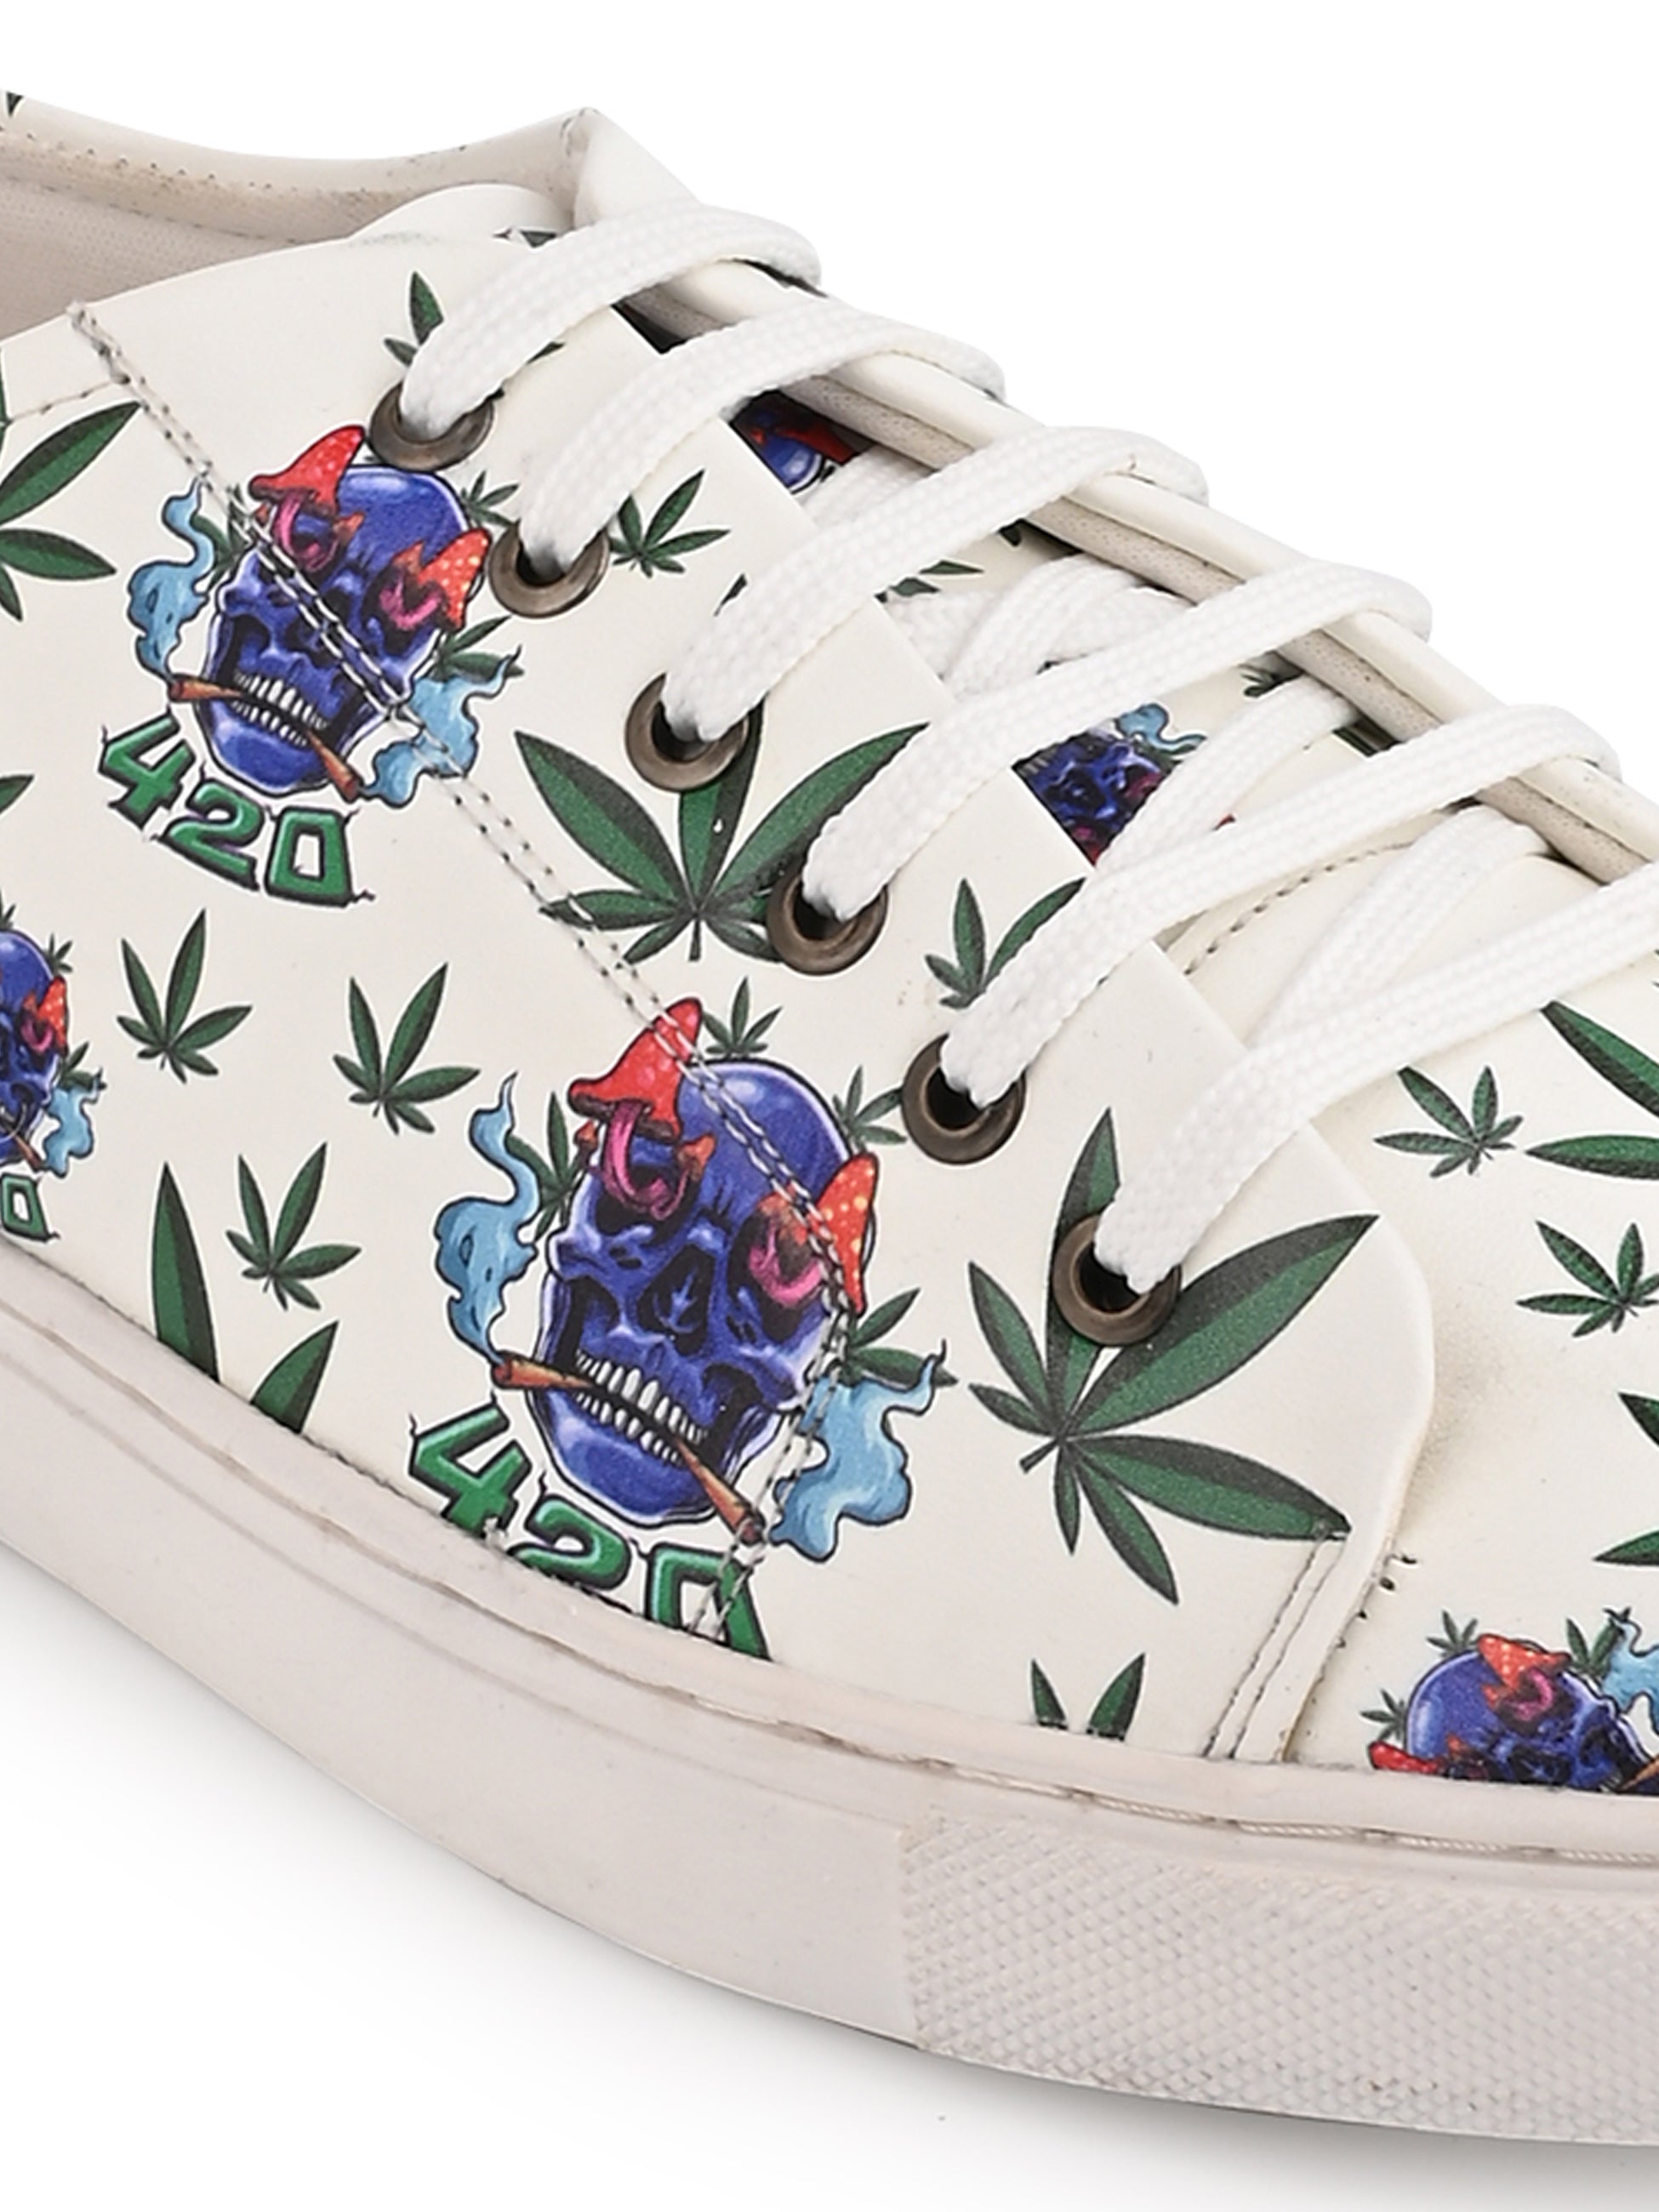 Skull 420 Weed Design Snow White Shoe - Printed Synthetic Vegan Leather